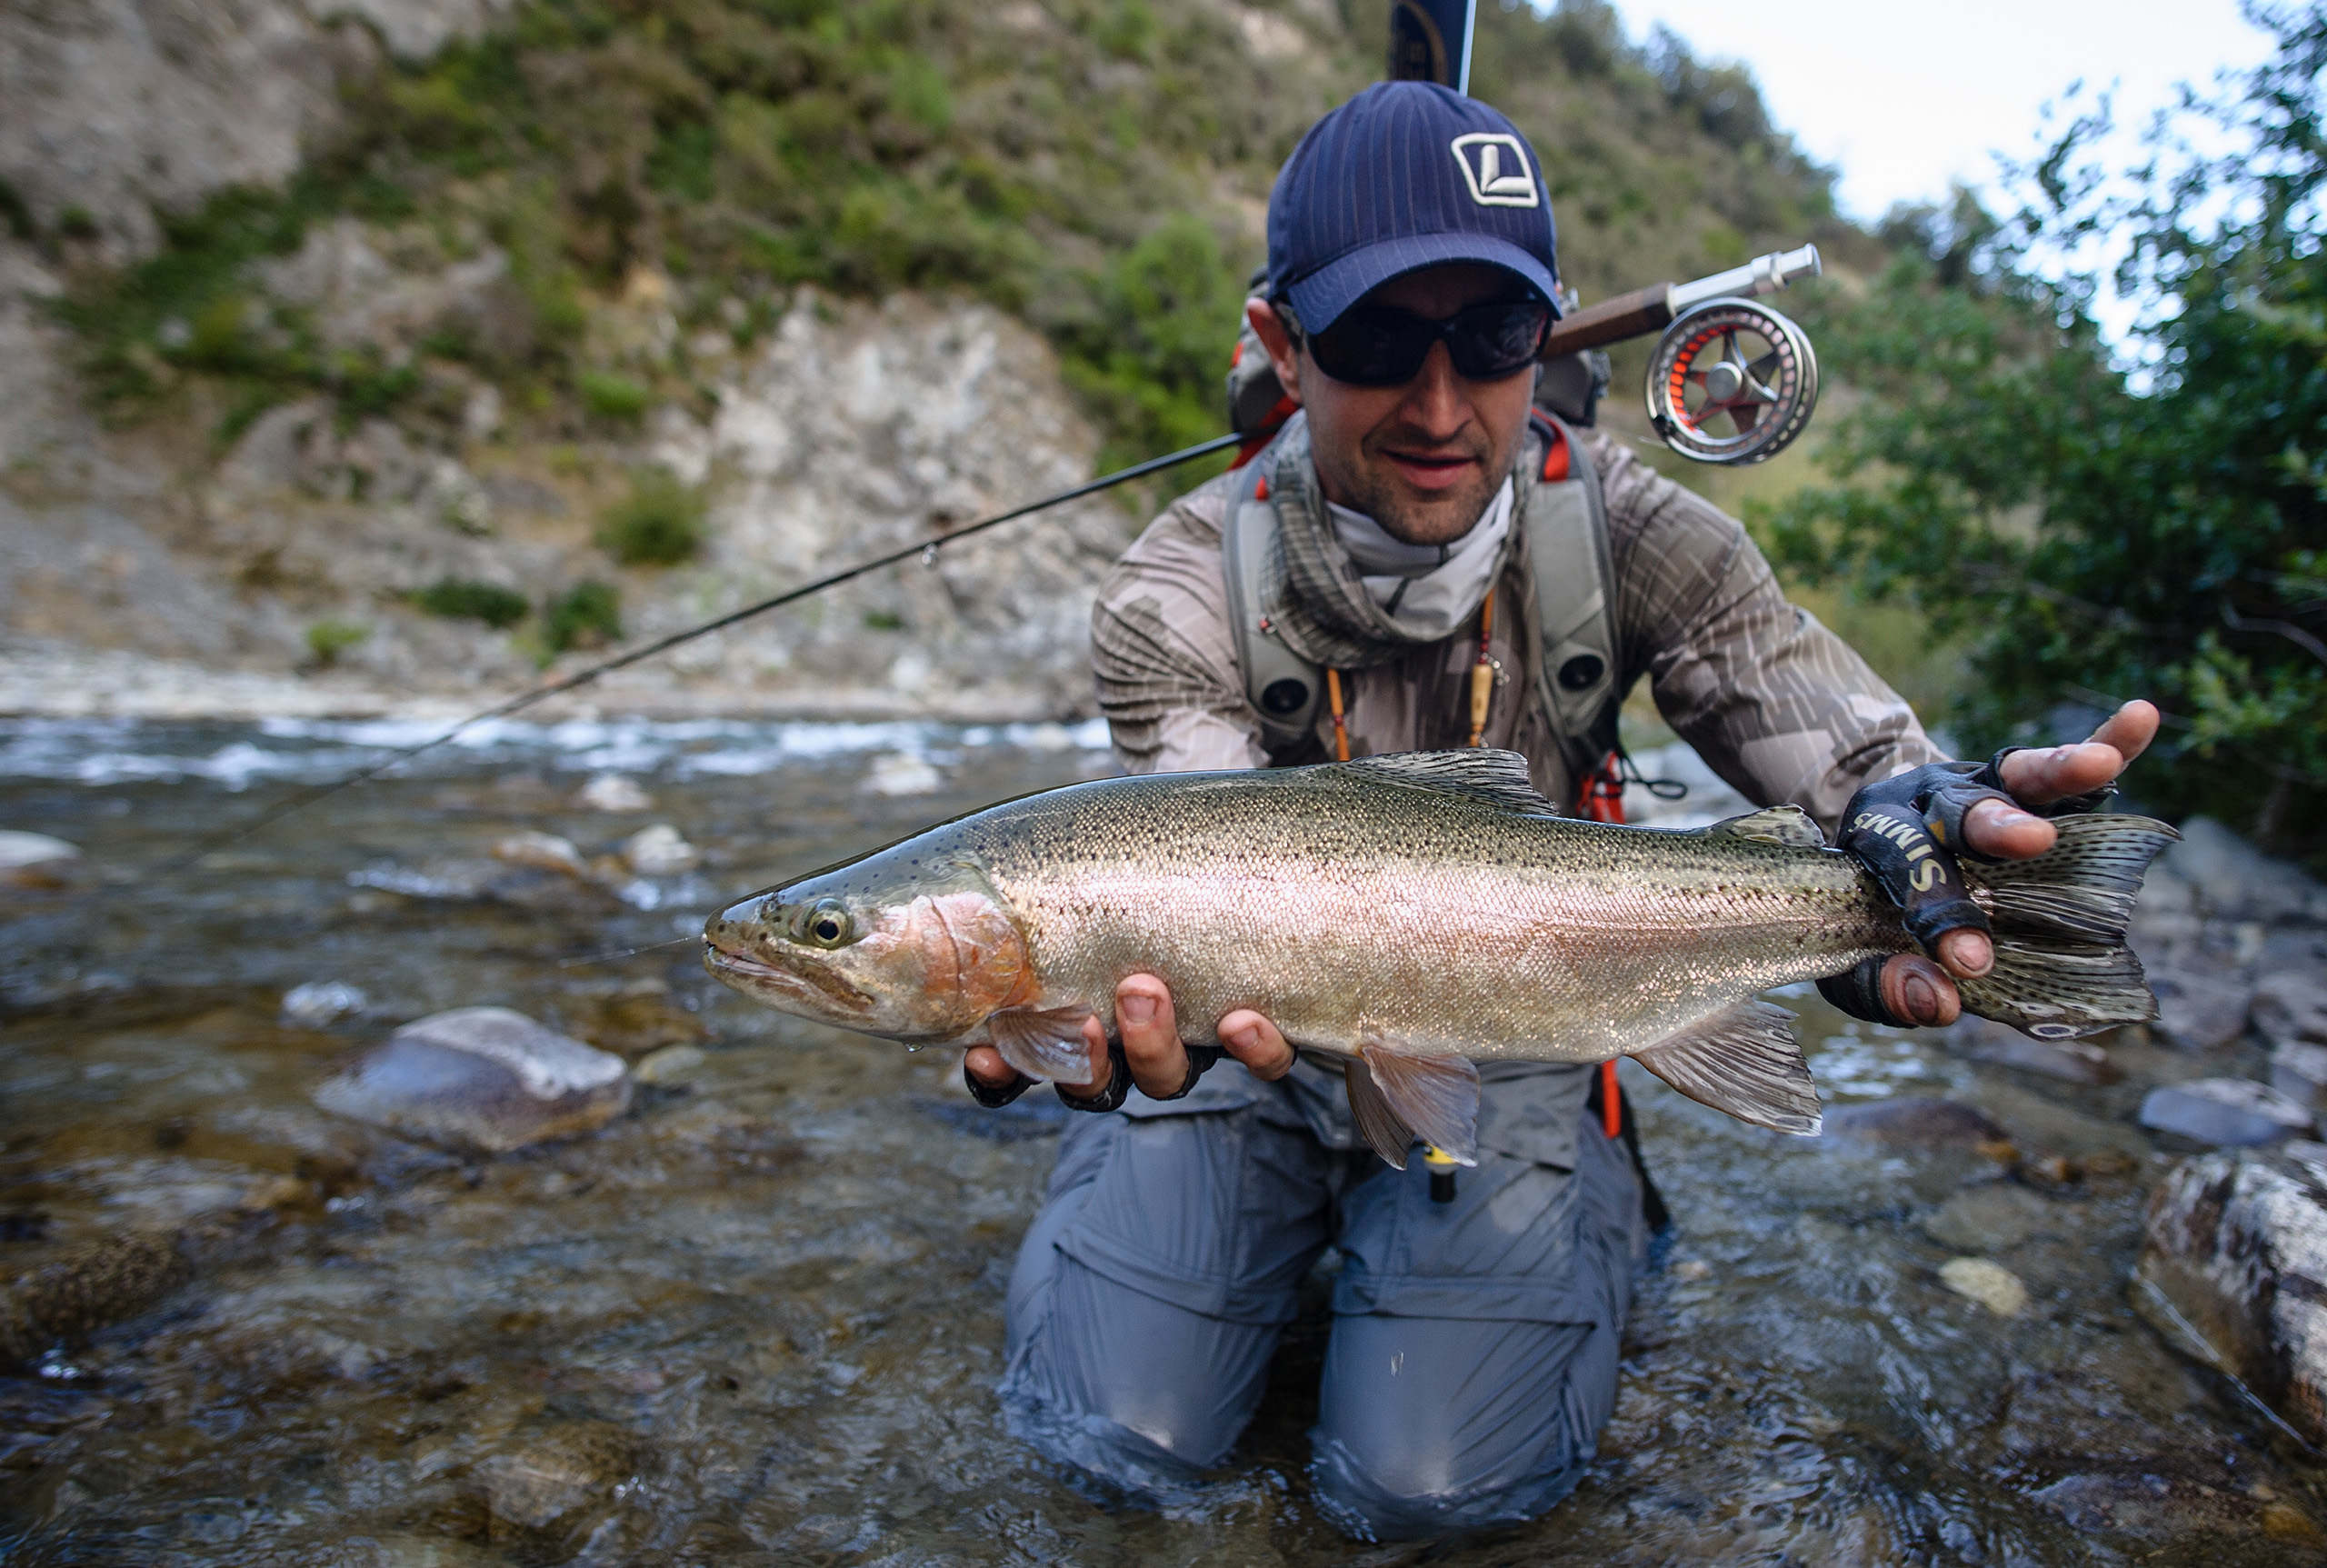 New Zealand - Fly Fishing dream come true